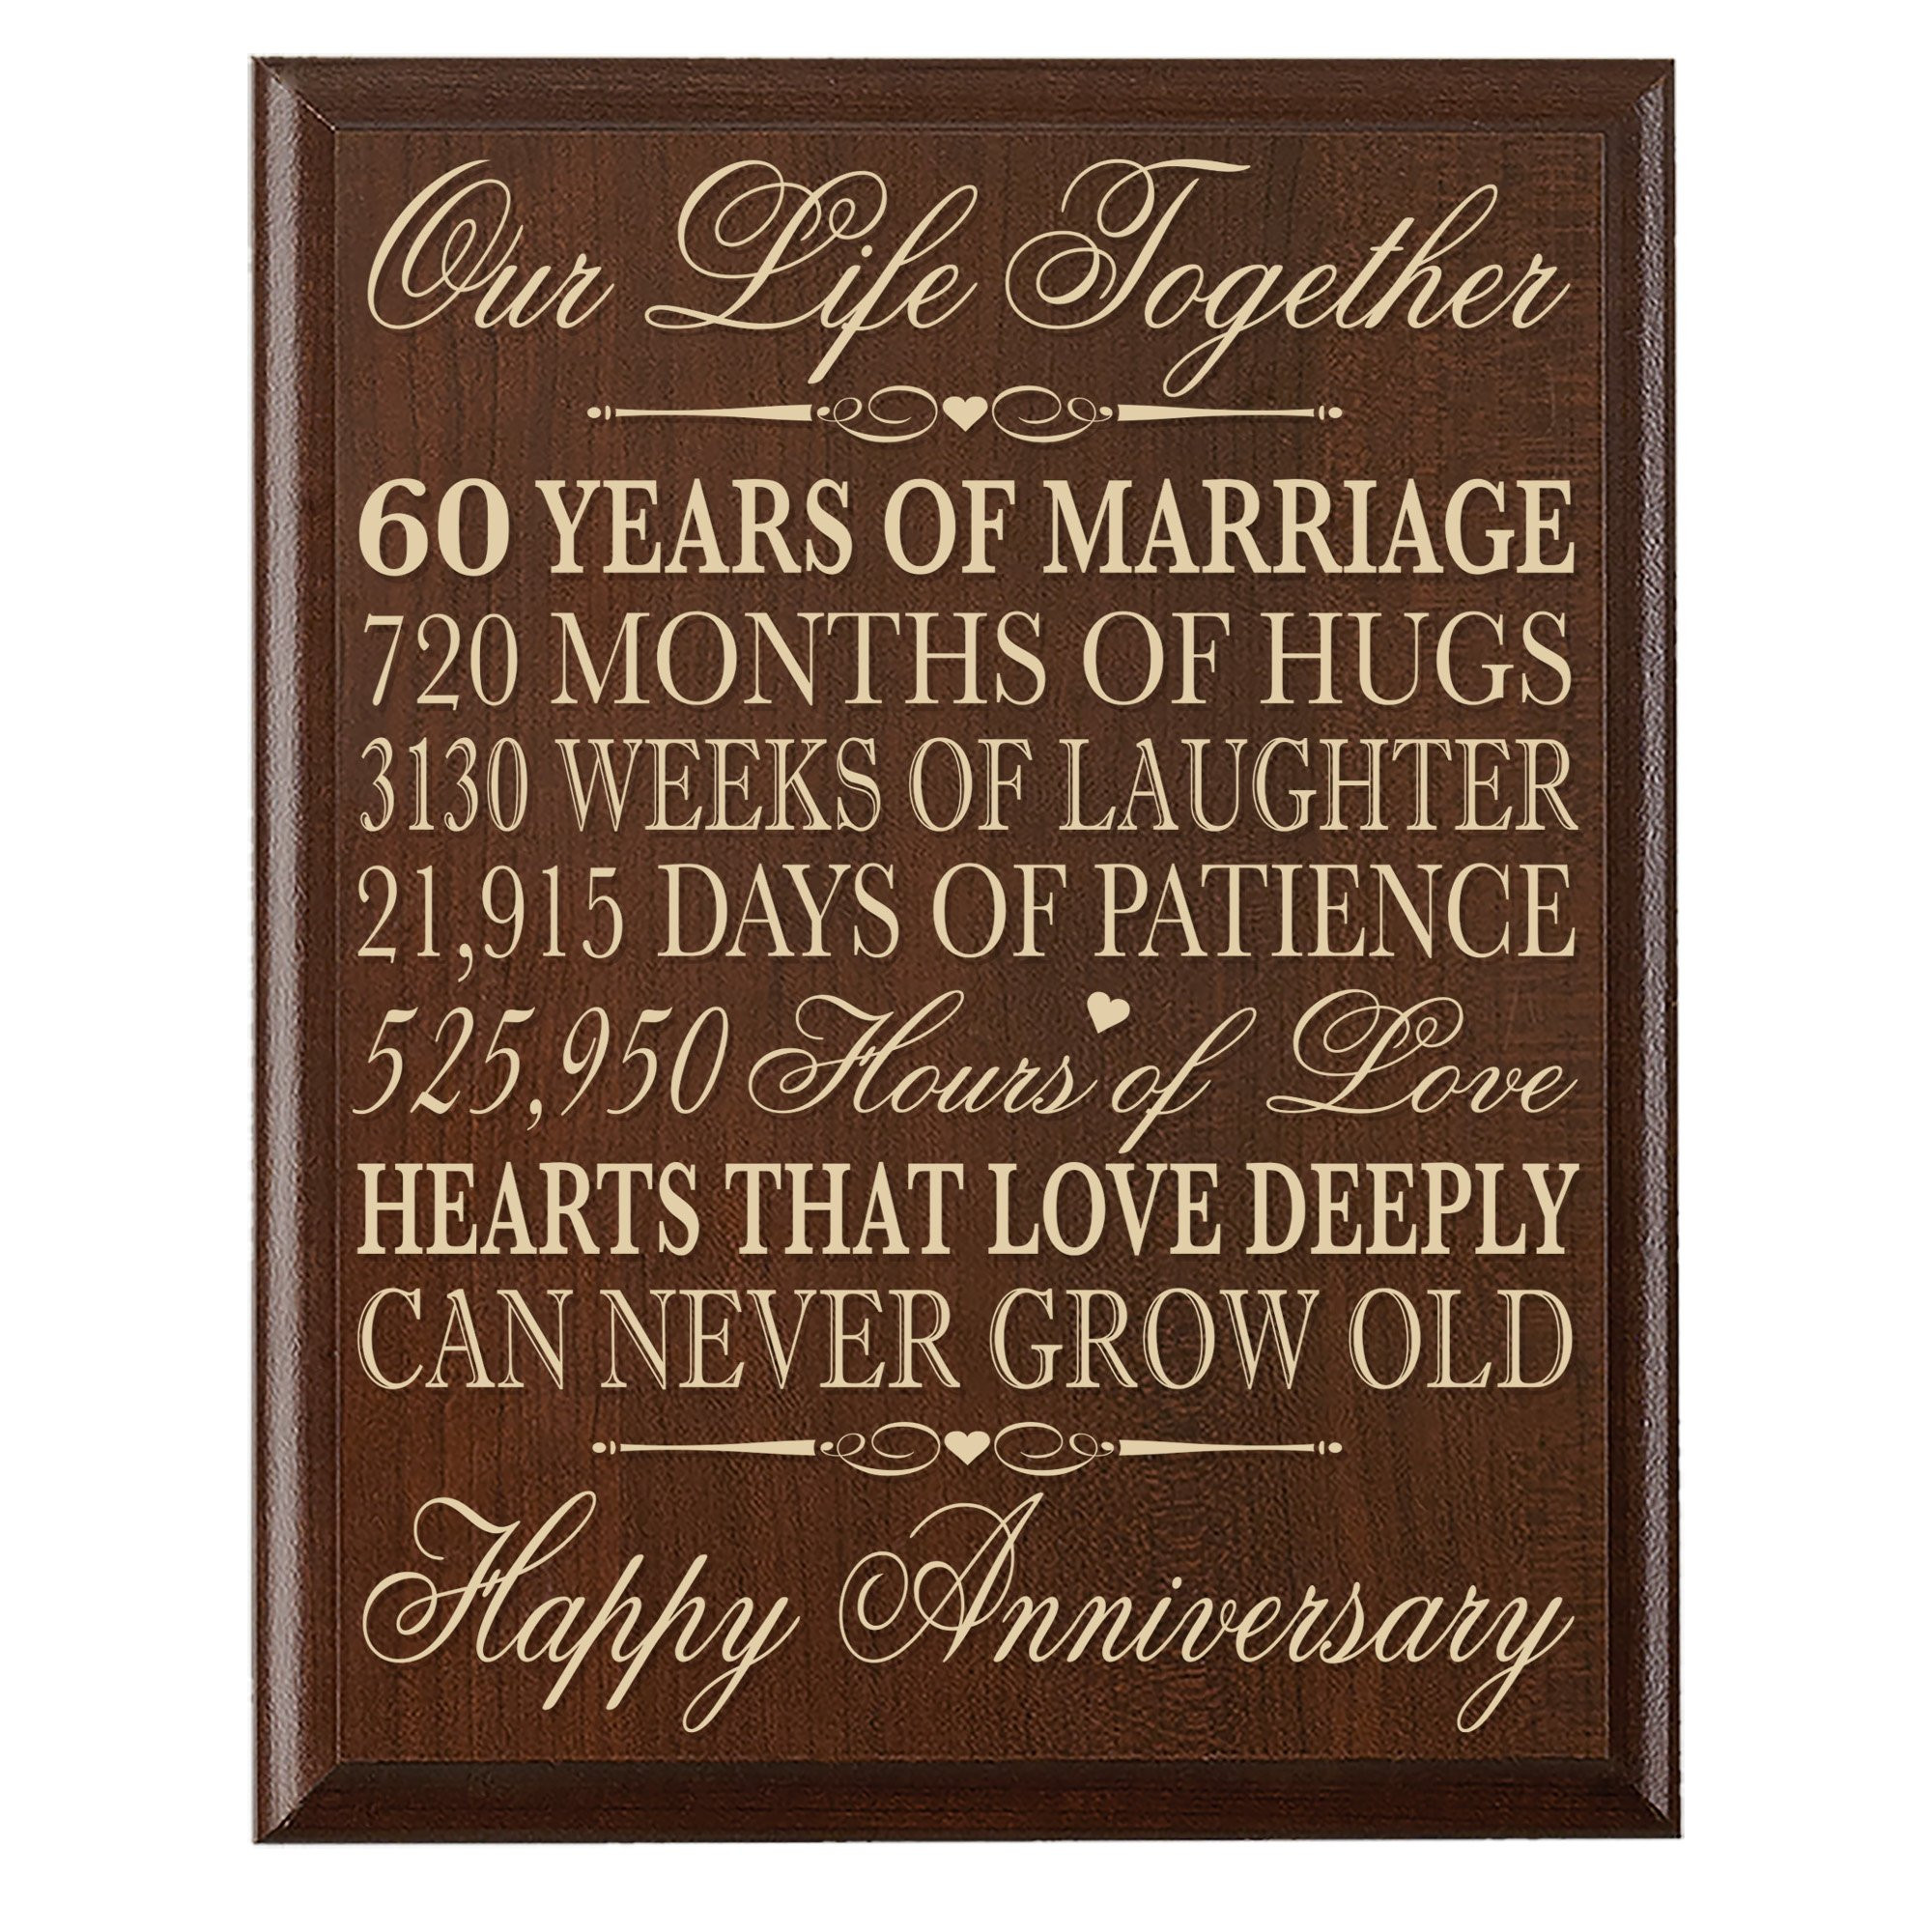 60 Wedding Anniversary Gift Ideas
 60th Wedding Anniversary Wall Plaque Gifts for Couple